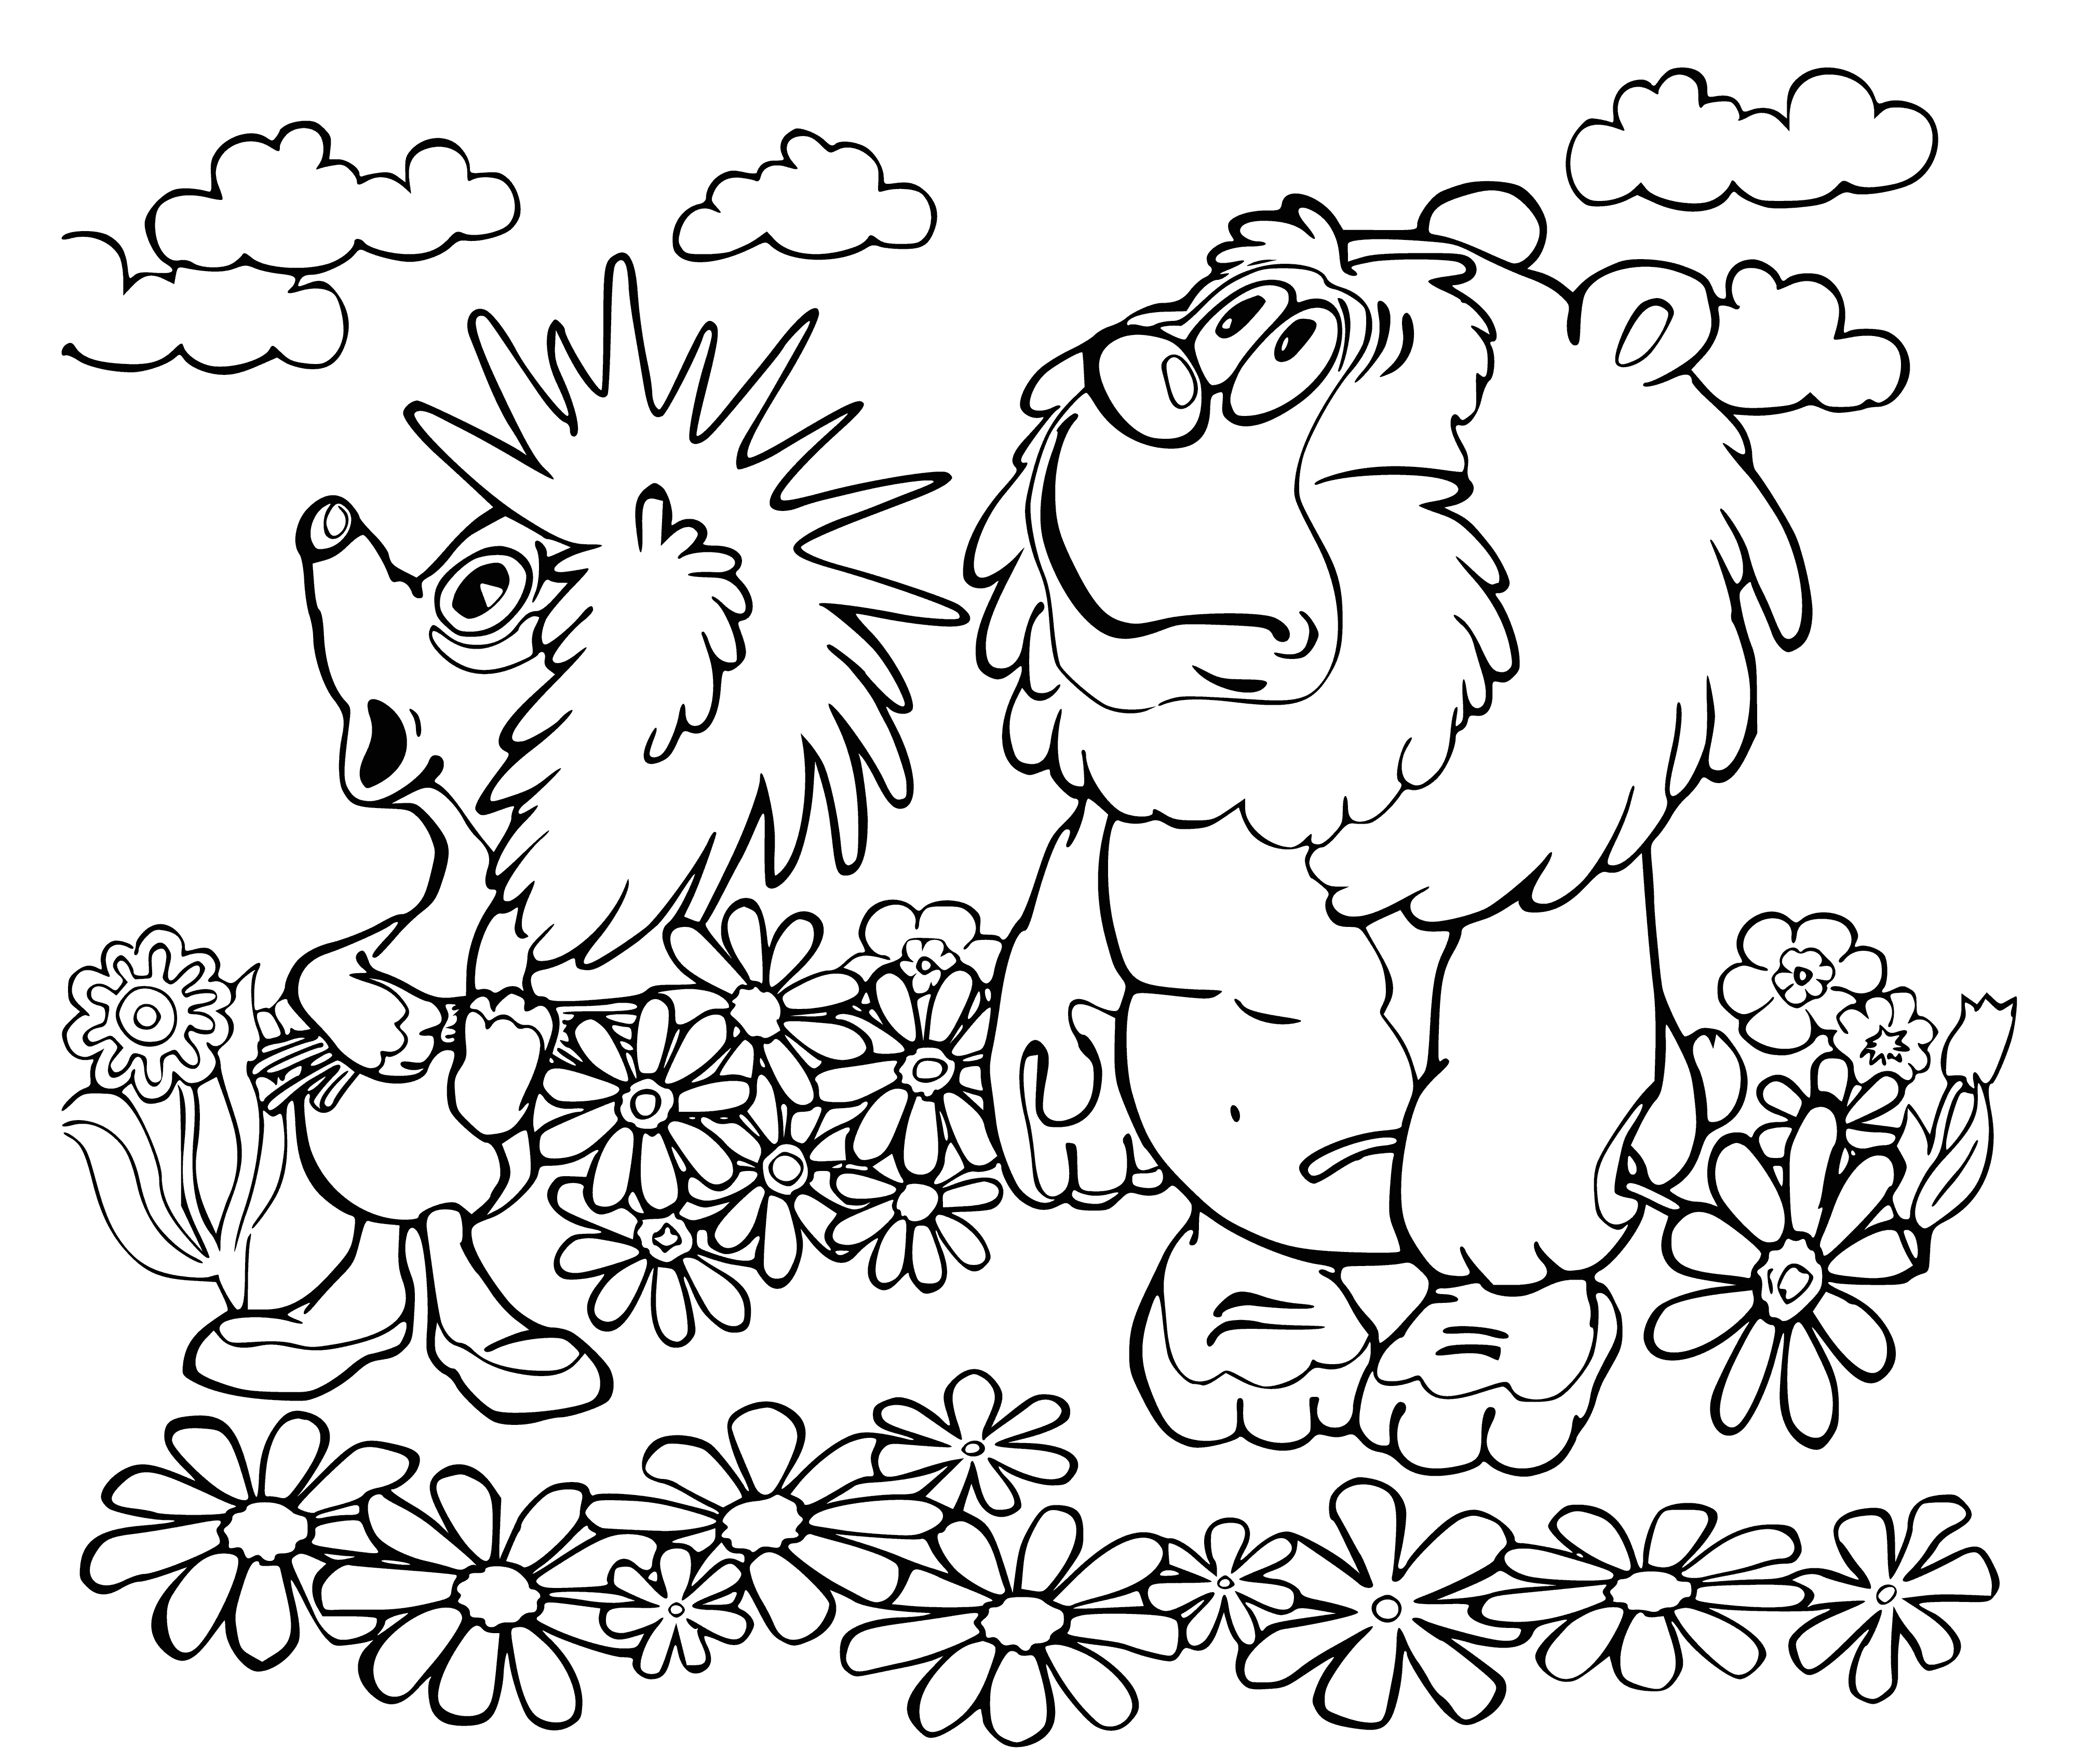 coloring page: Hedgehog holds stick in mouth, standing on a rock in a river; bear behind him stretching out paw to touch.